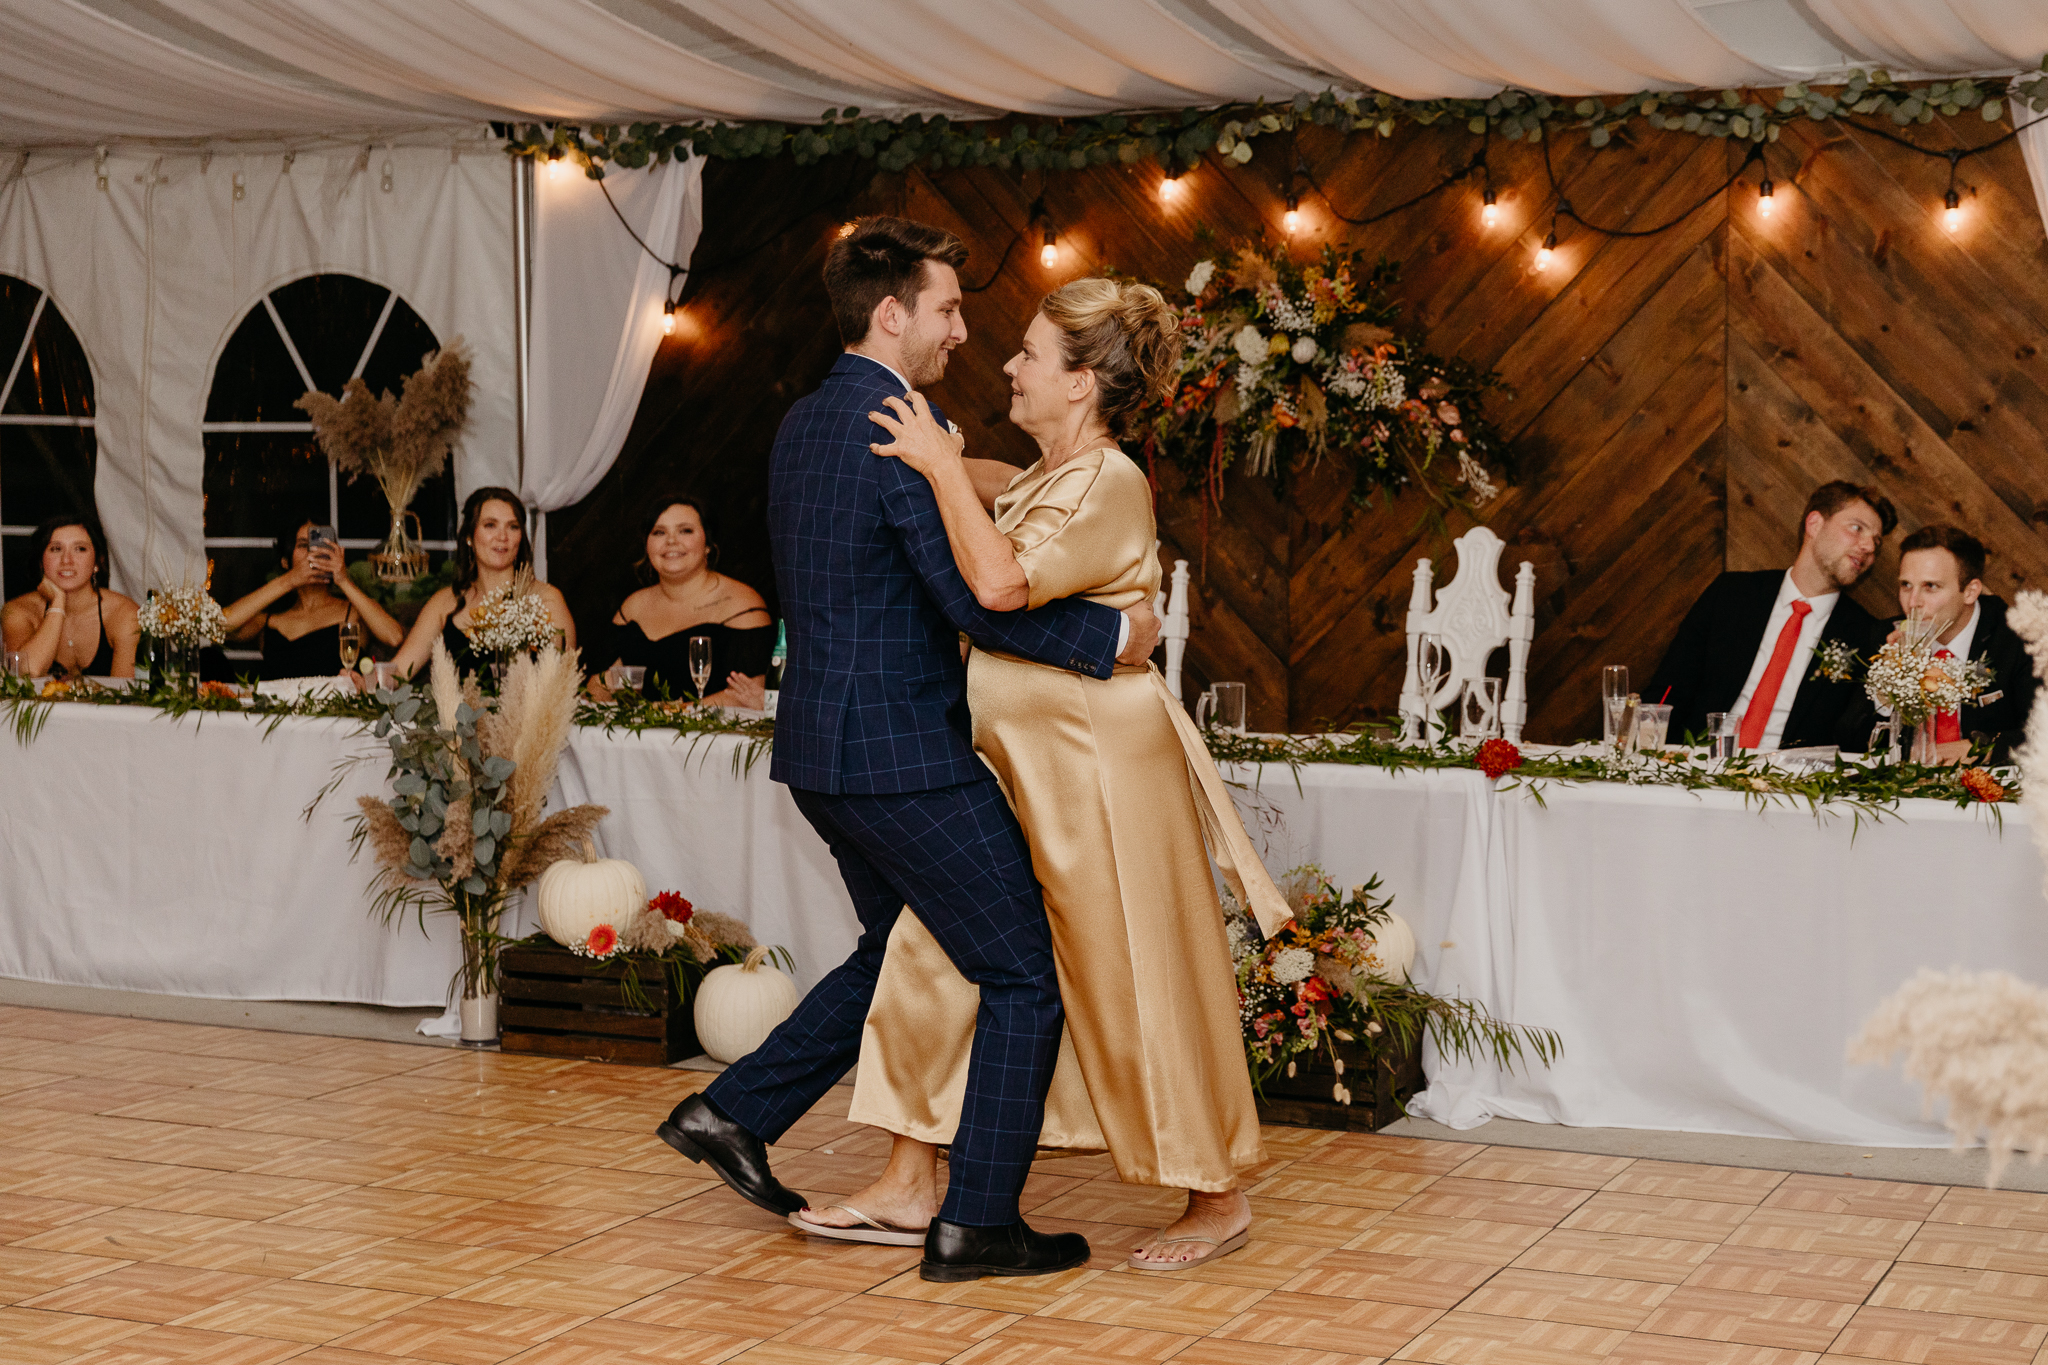 Groom dances with his mother on the dancefloor in a white tent wedding